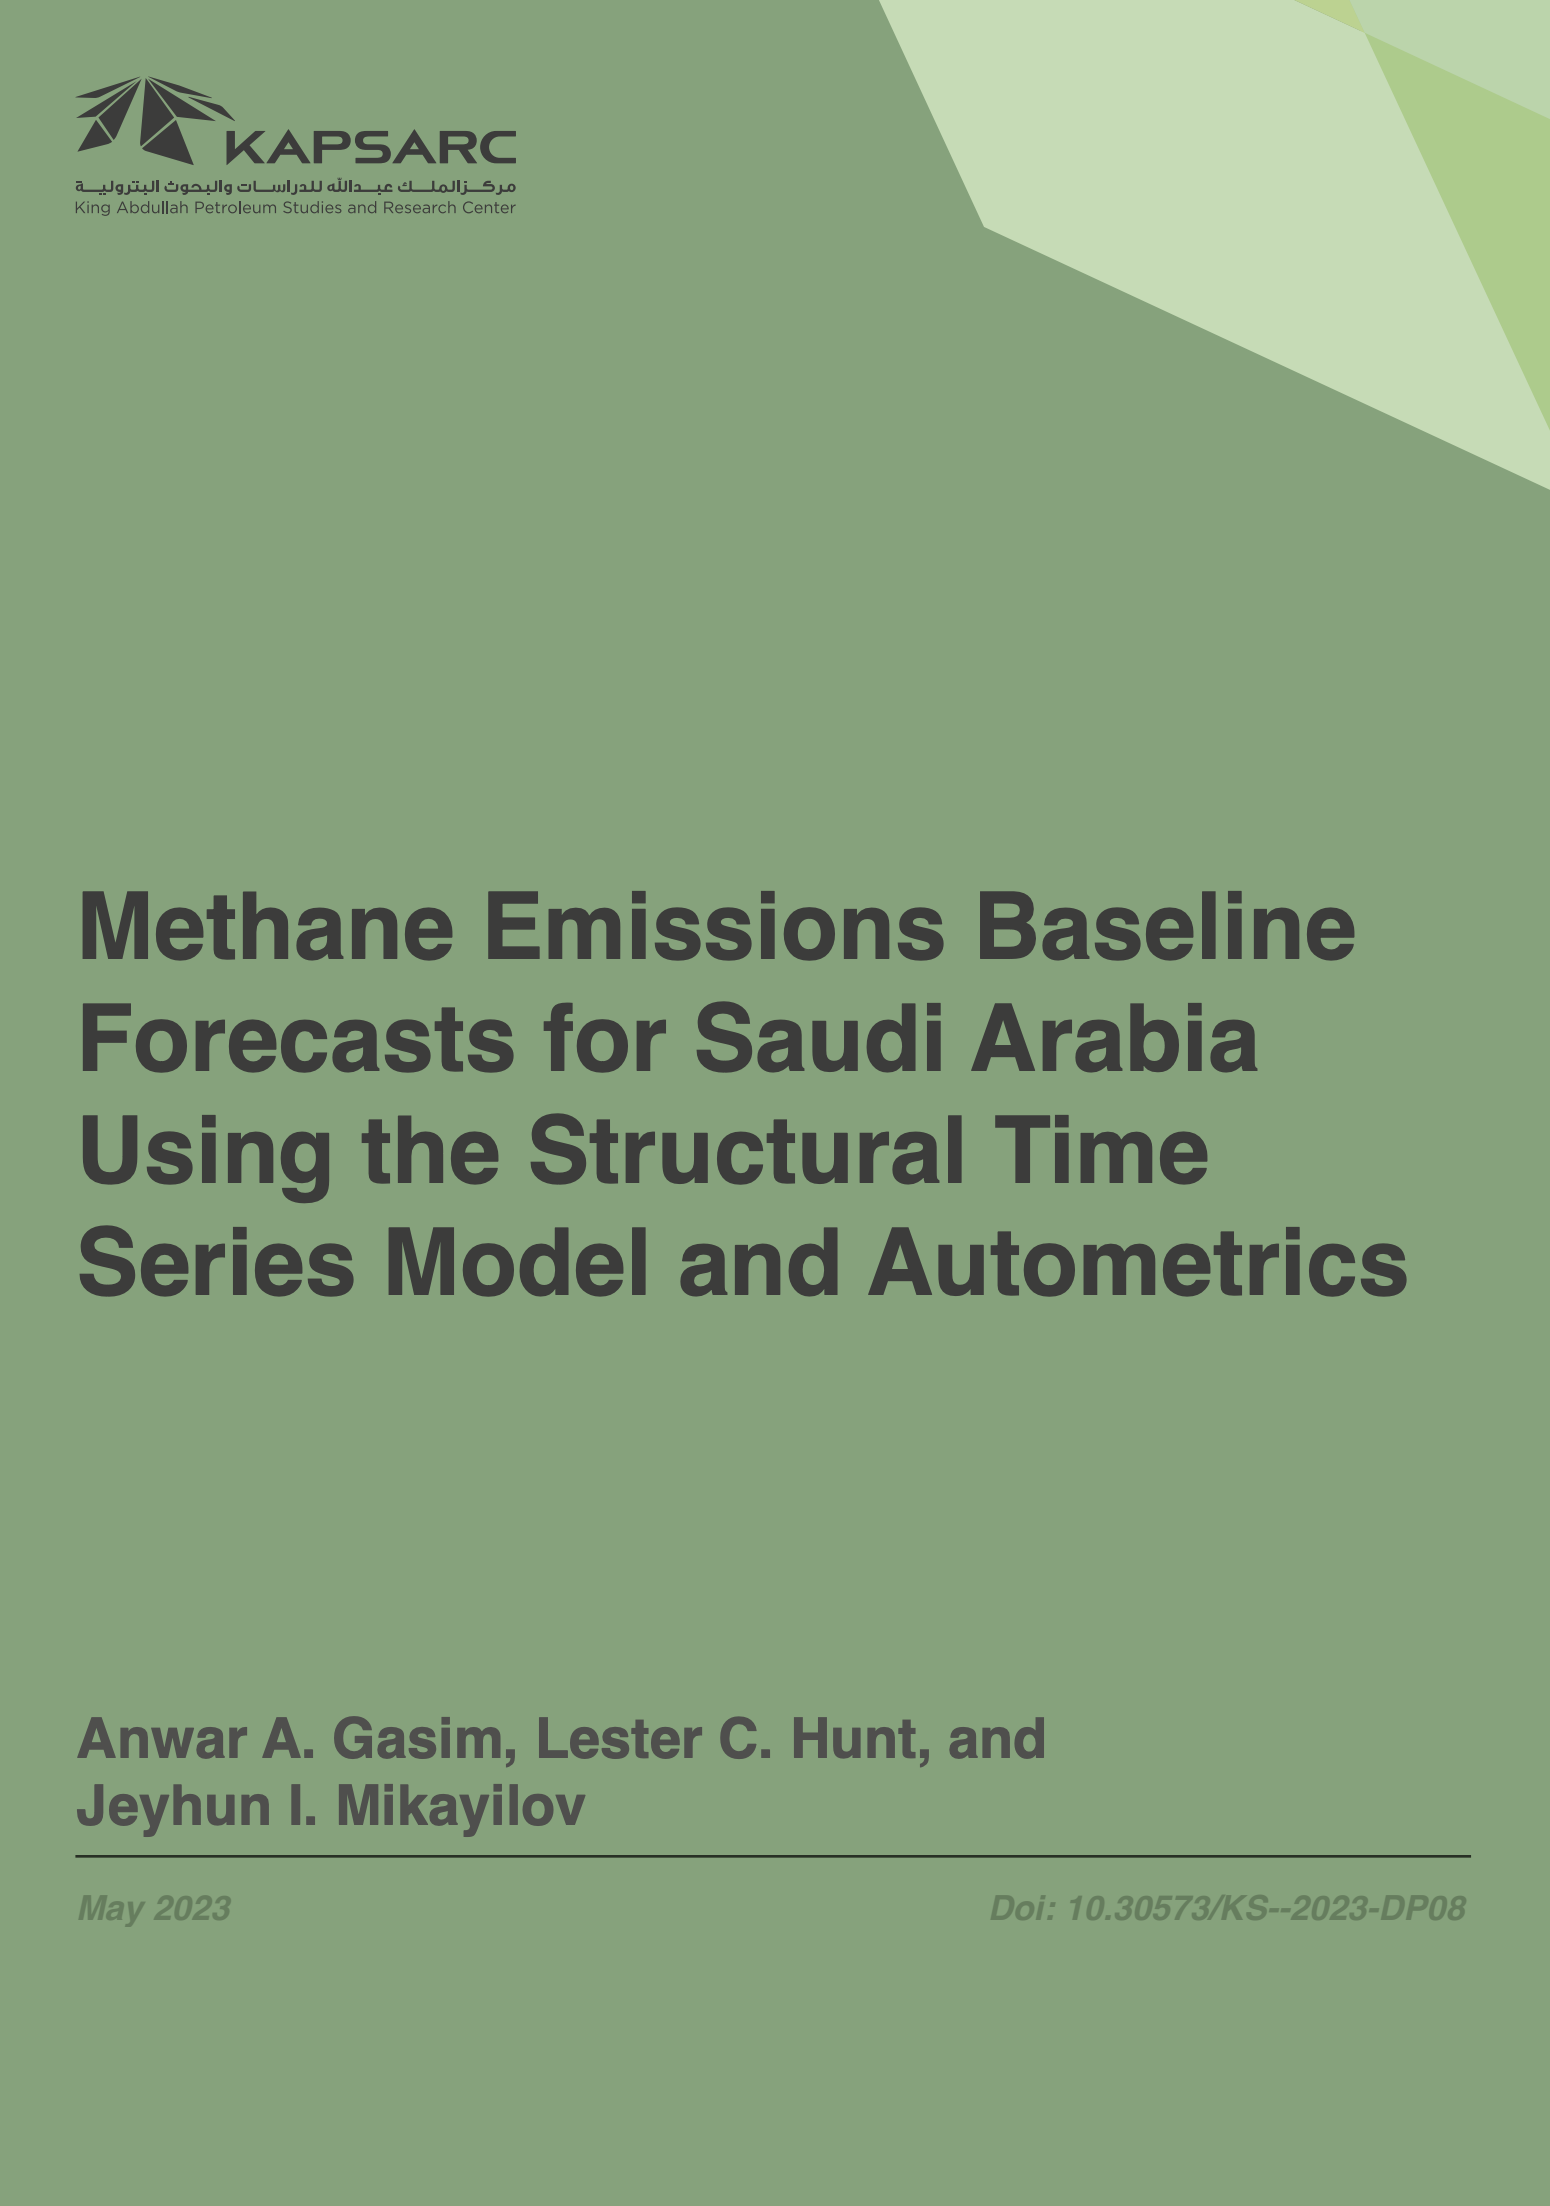 Methane Emissions Baseline Forecasts for Saudi Arabia Using the Structural Time Series Model and Autometrics